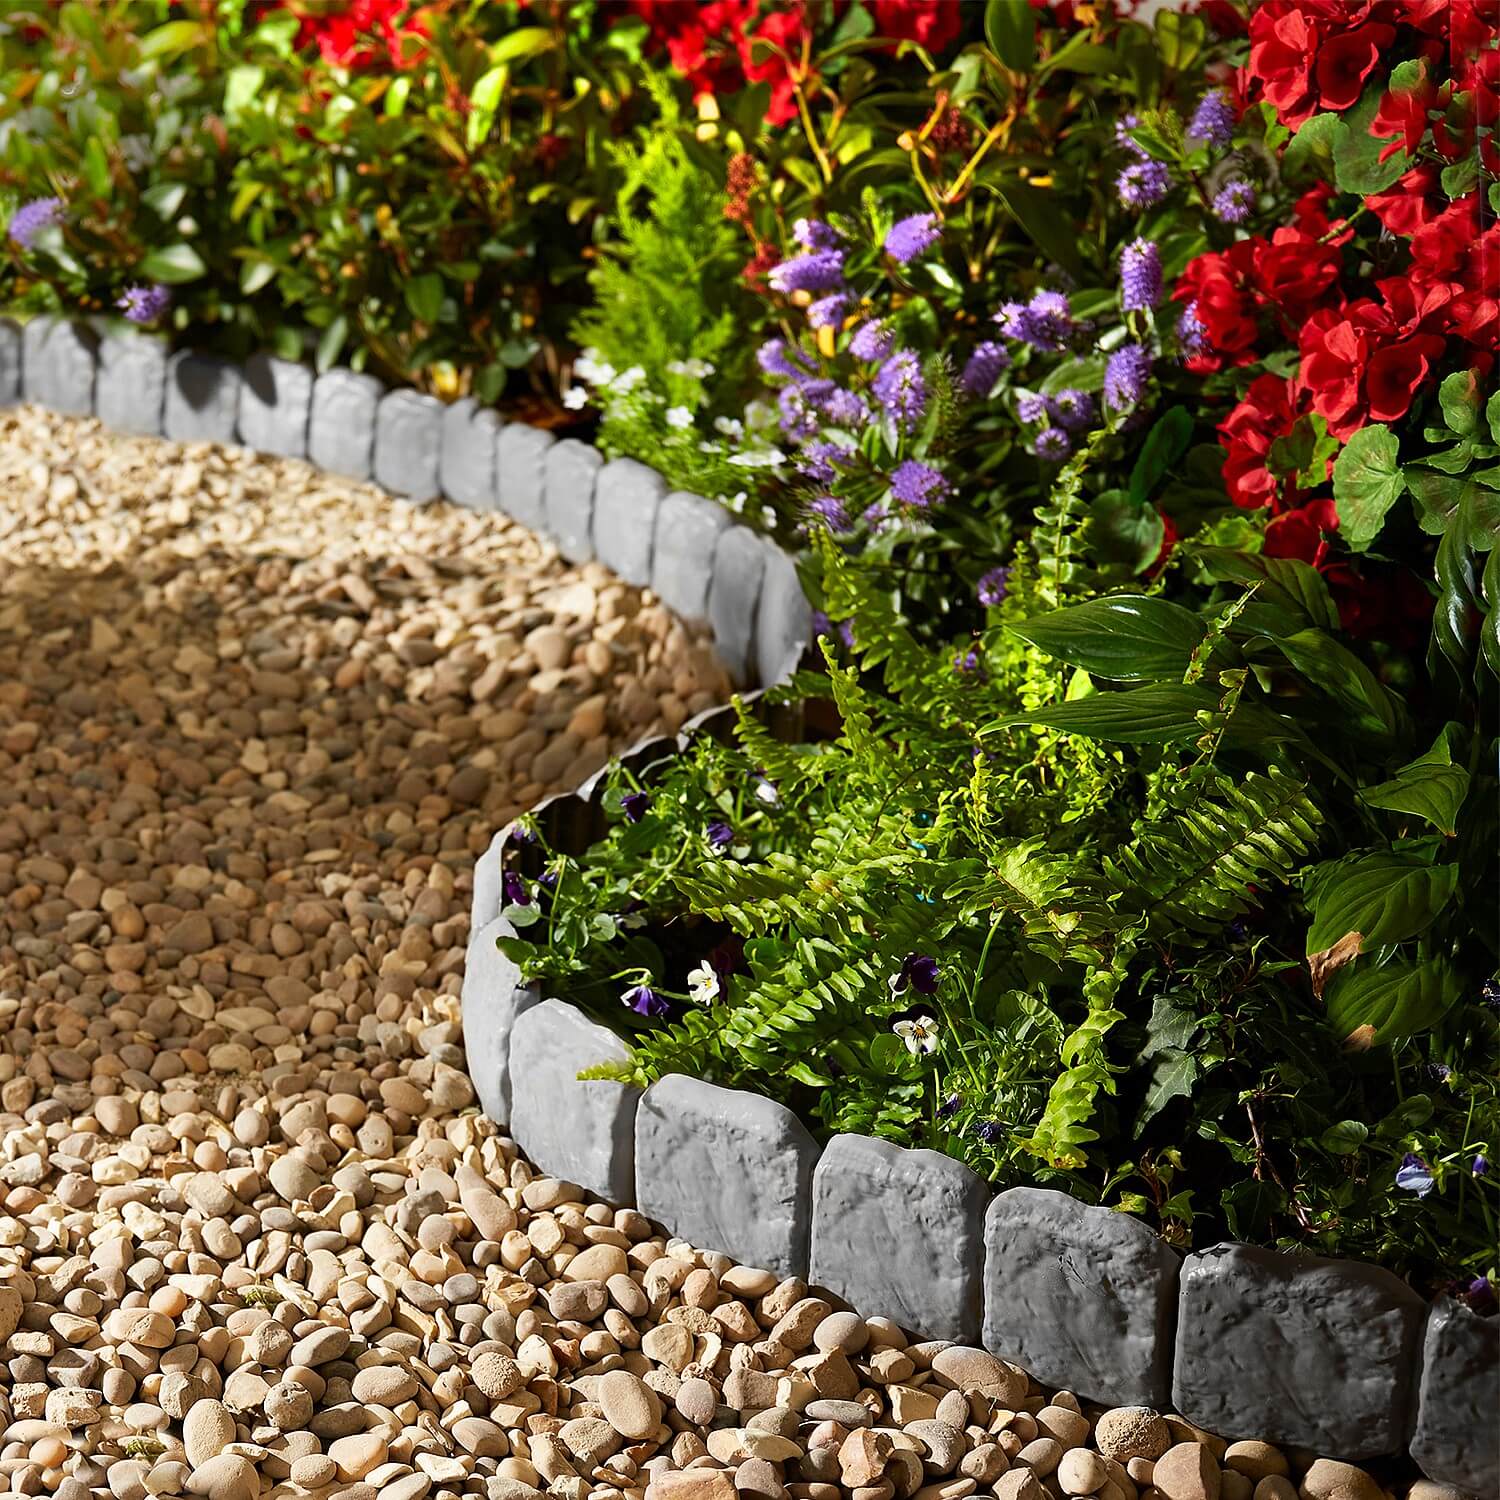 Cobbled Stone-Effect Lawn Edging - Buy 3 Get 1 Free